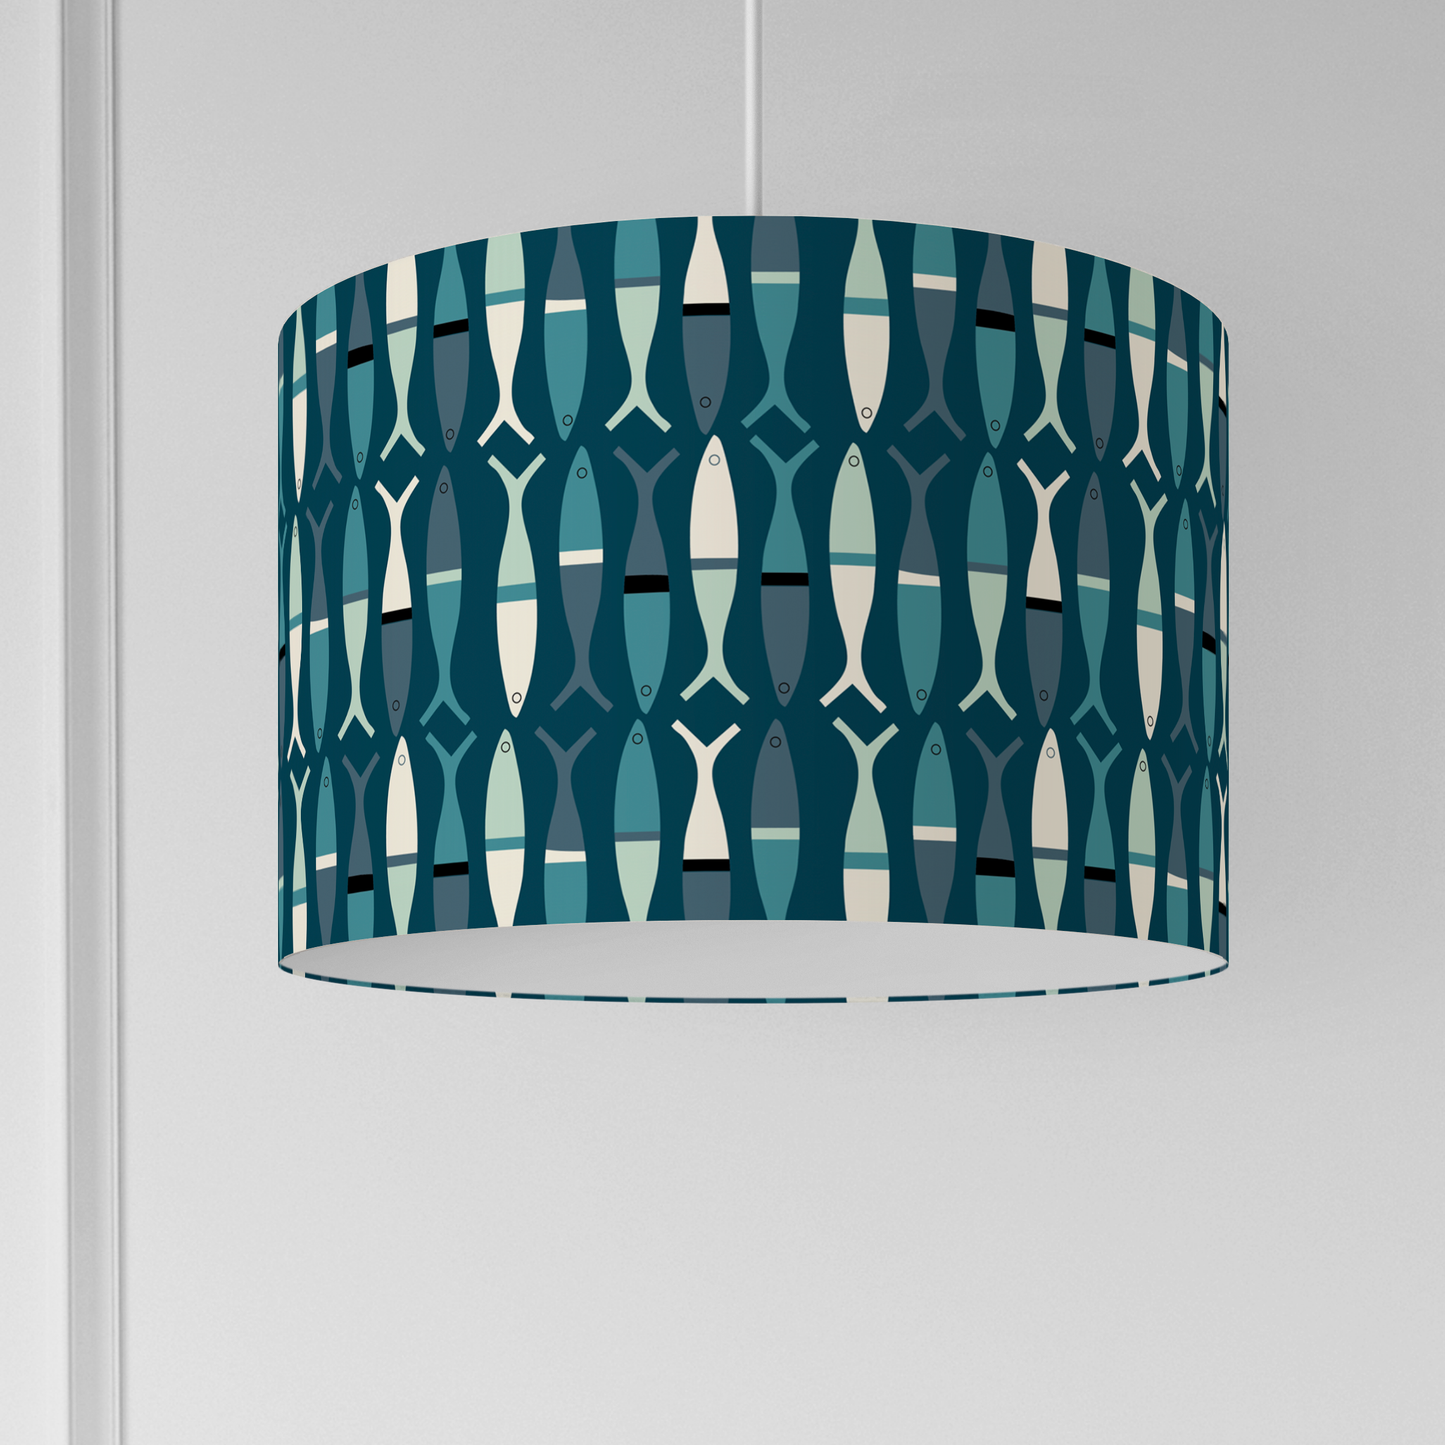 Sardines Lampshade (Ceiling/Pendant or Table)